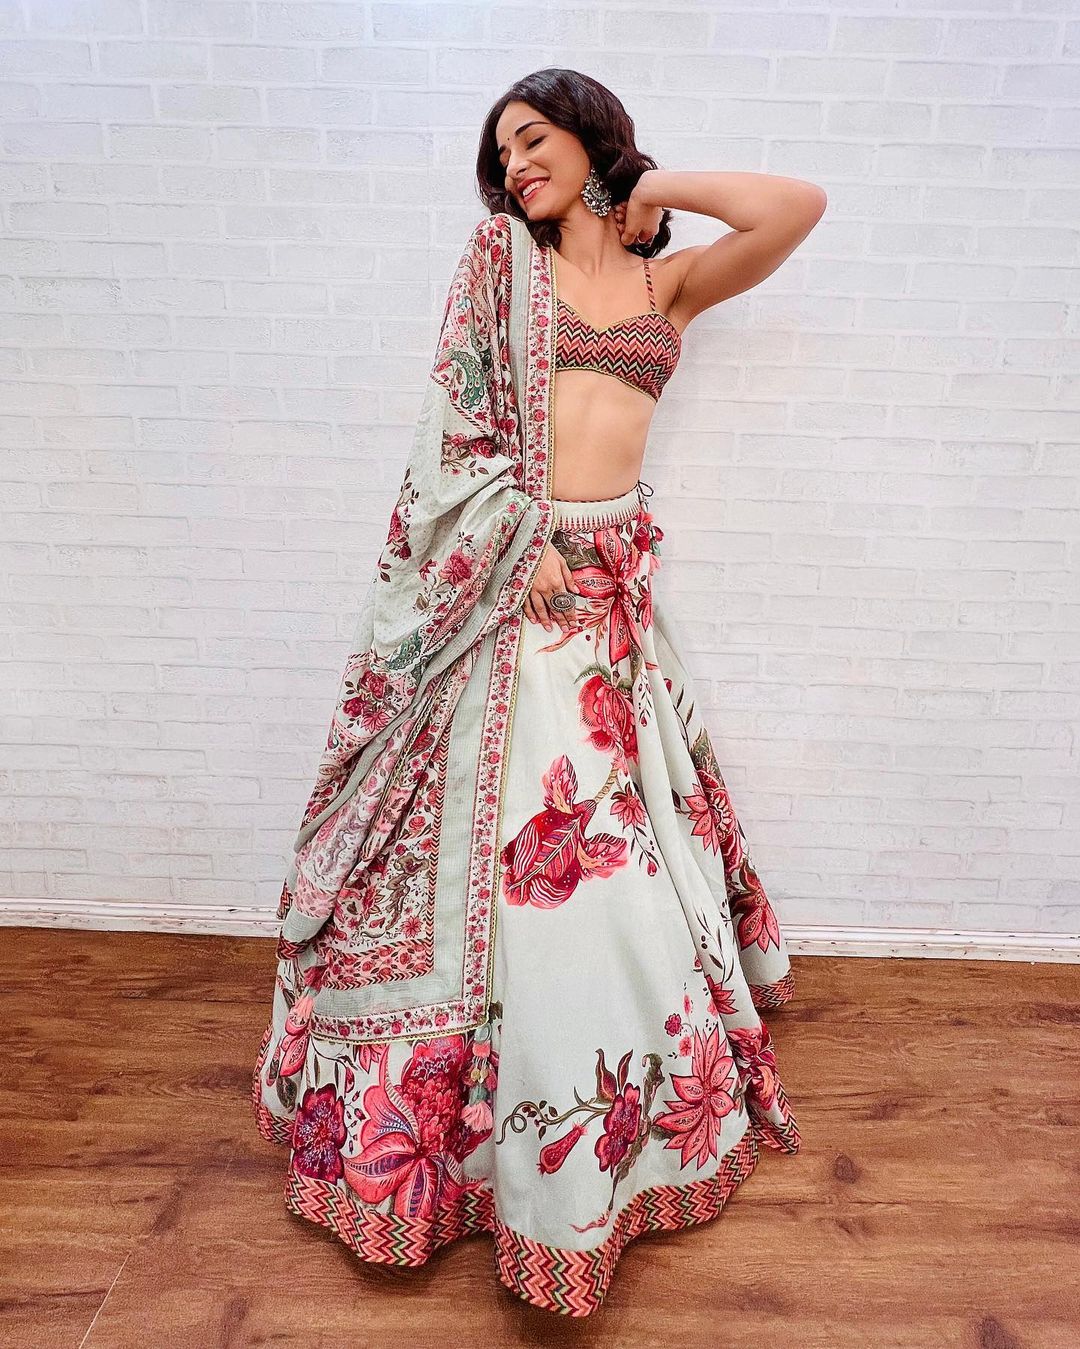 Ananya Panday is a vision to behold in a vibrant floral-printed lehenga.